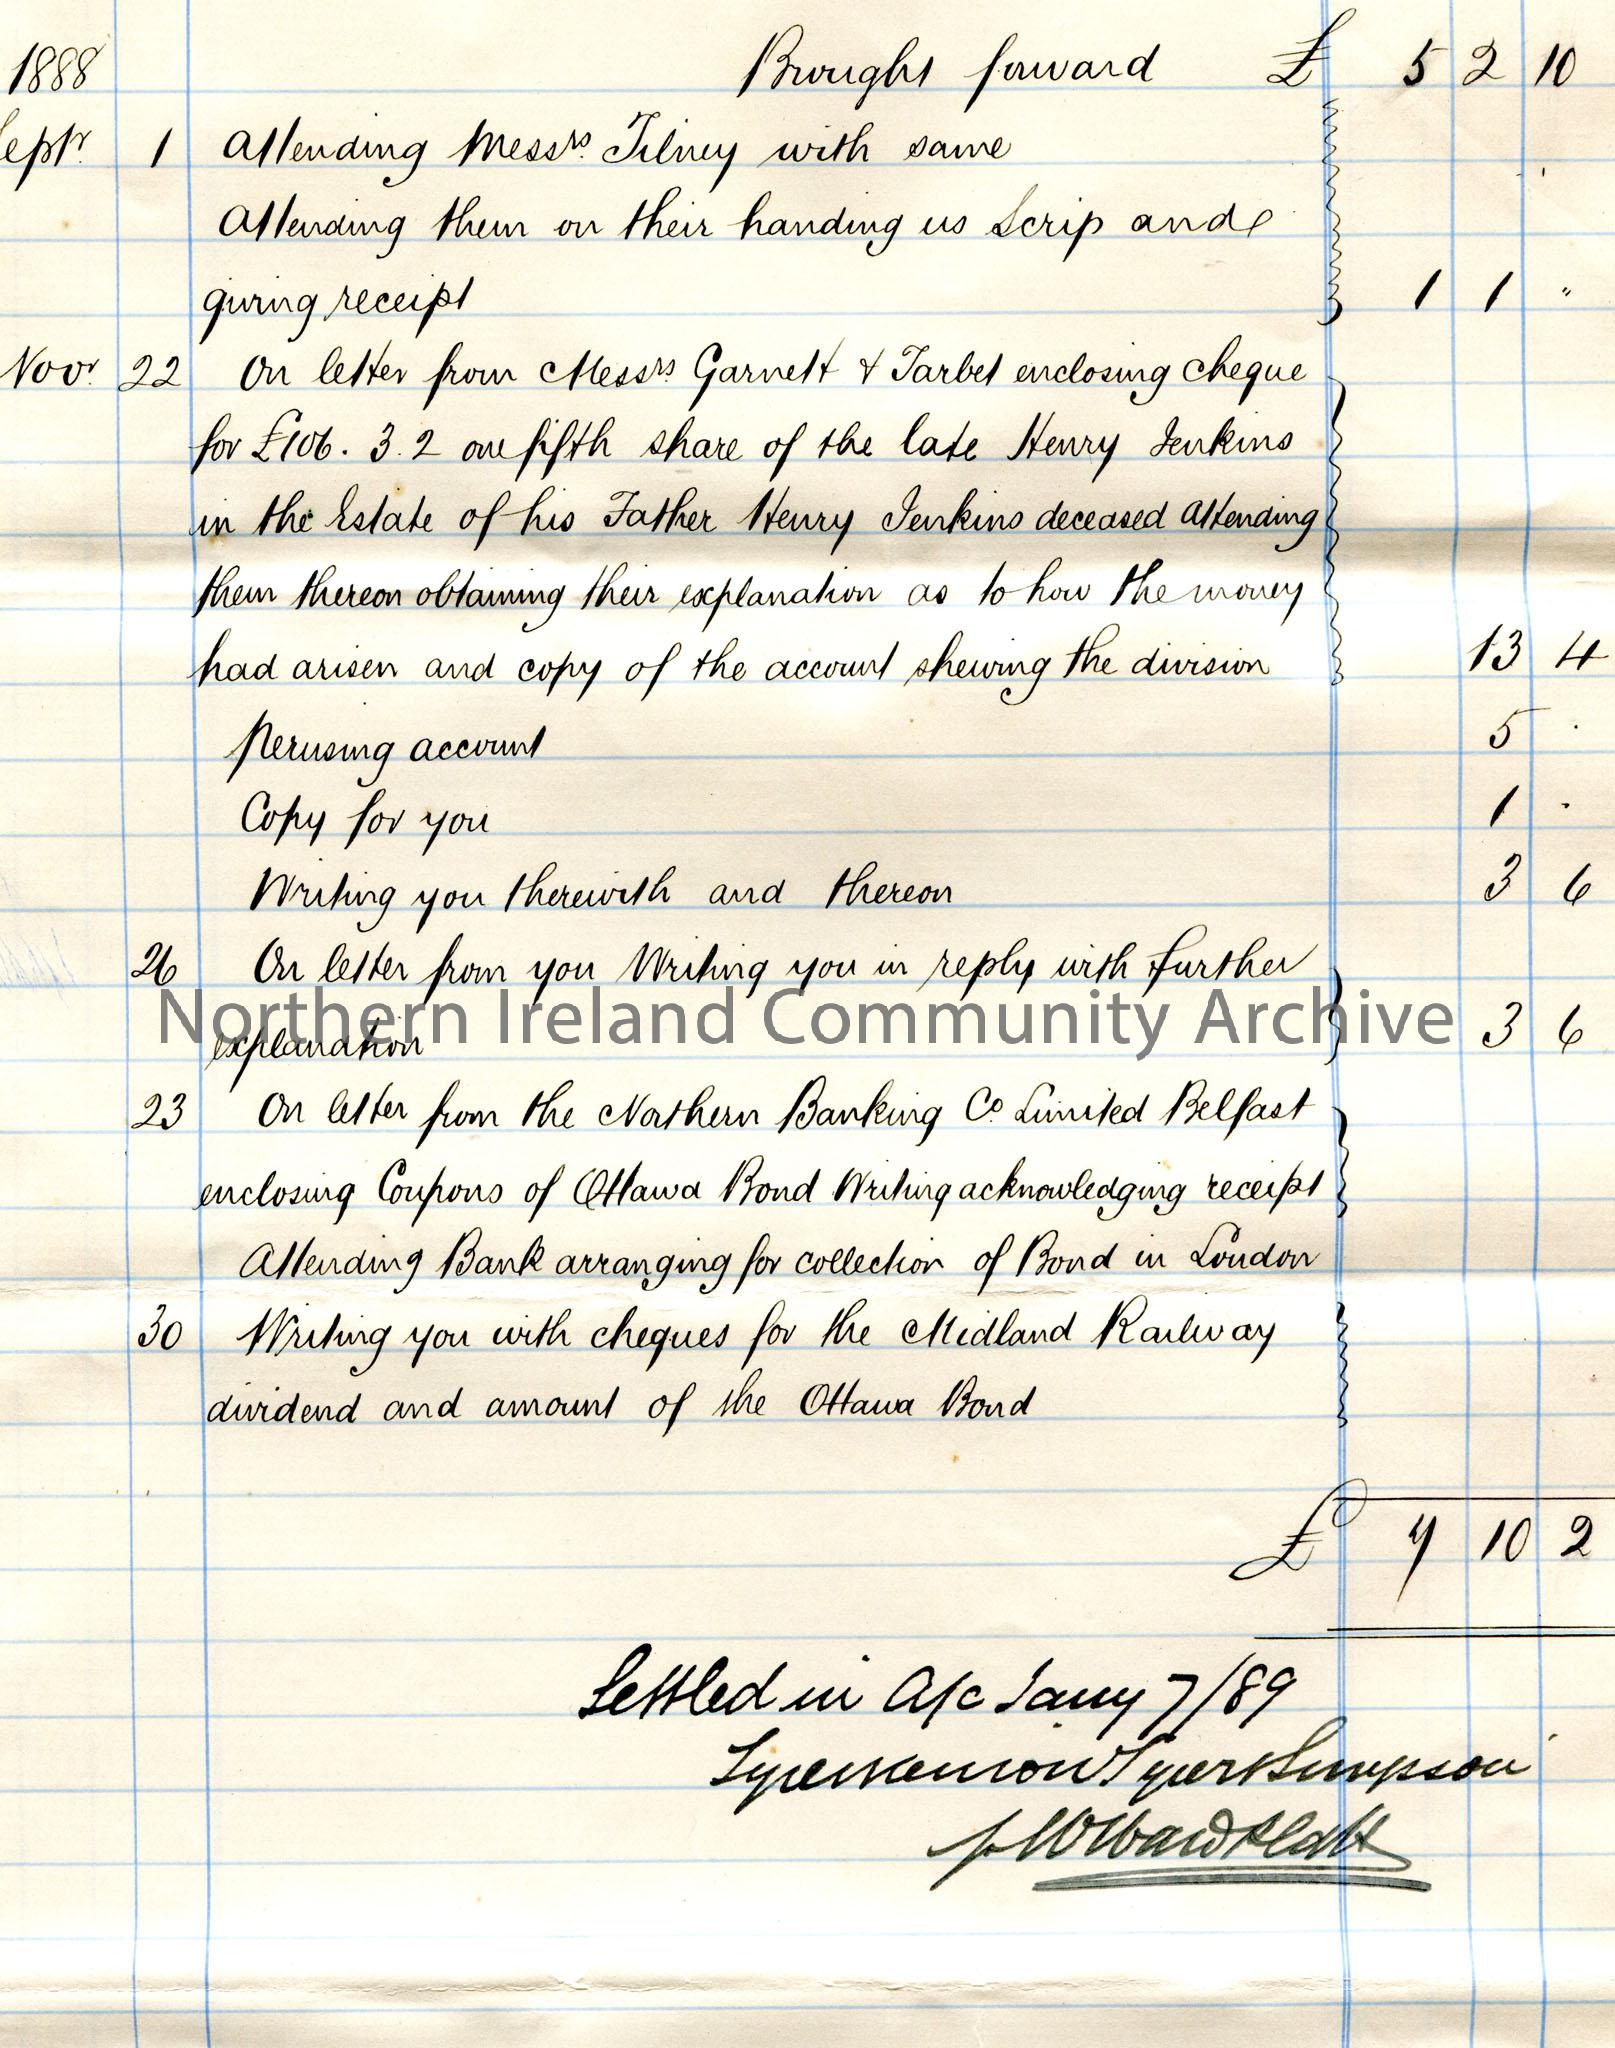 Page 3 of 4 of handwritten bill to Misses Hezlet. Details of costs for services re Foster’s Mortgage and General. Dated from 24th July 1886 – 30th Nov…